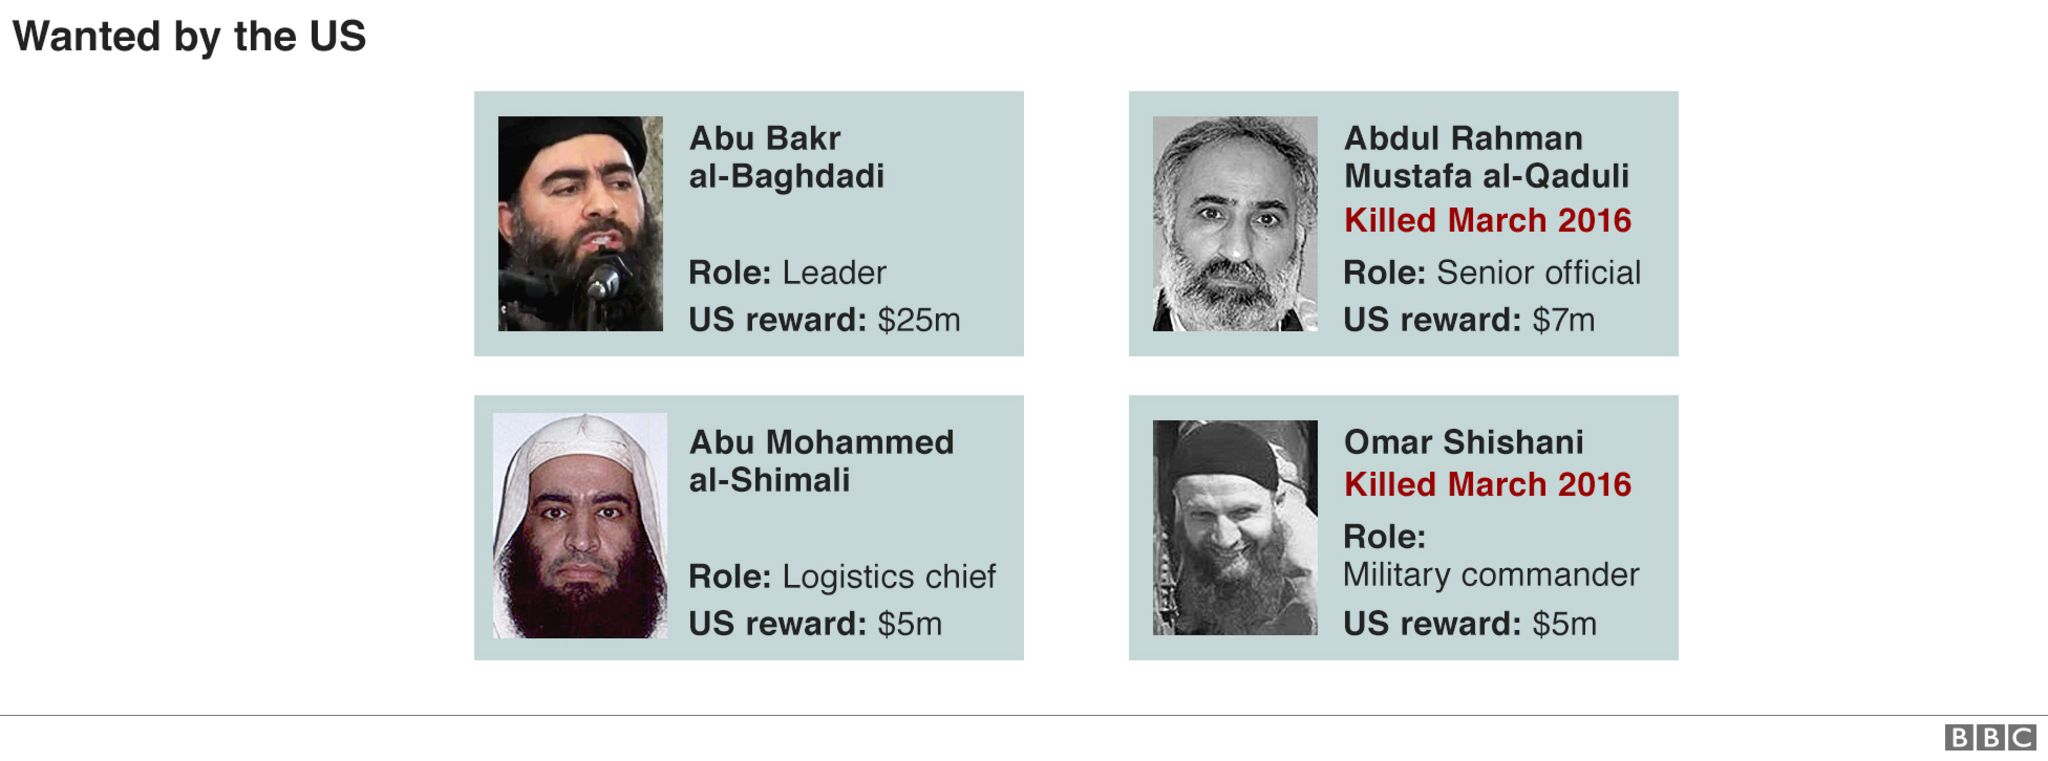 Gallery of 'Islamic State' leaders wanted by the US